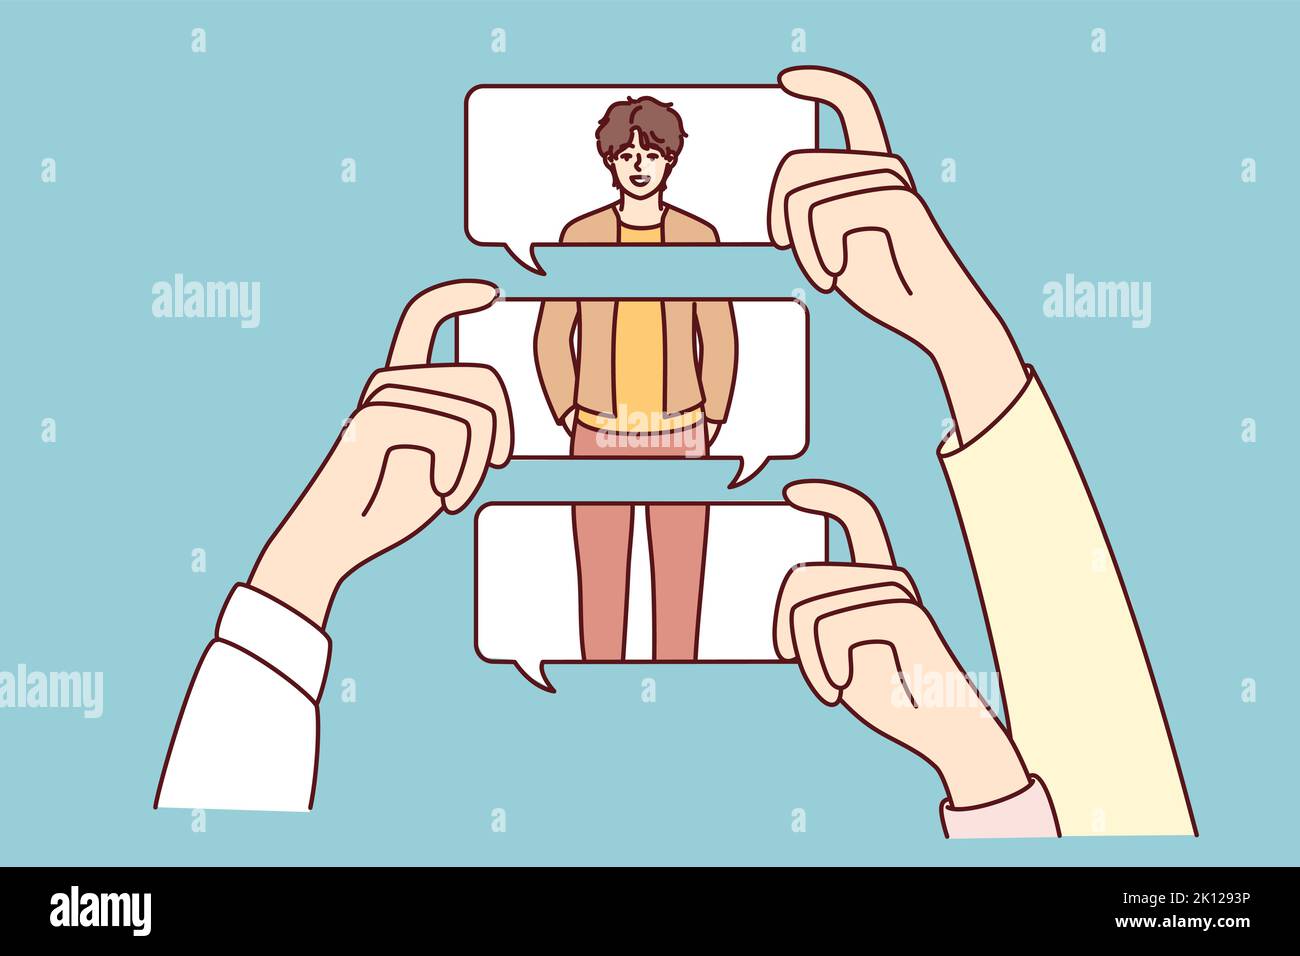 People hands holding message bubbles make comments about person looks. Anonymous commentary judgements and sharing negative opinions online. Vector illustration.  Stock Vector